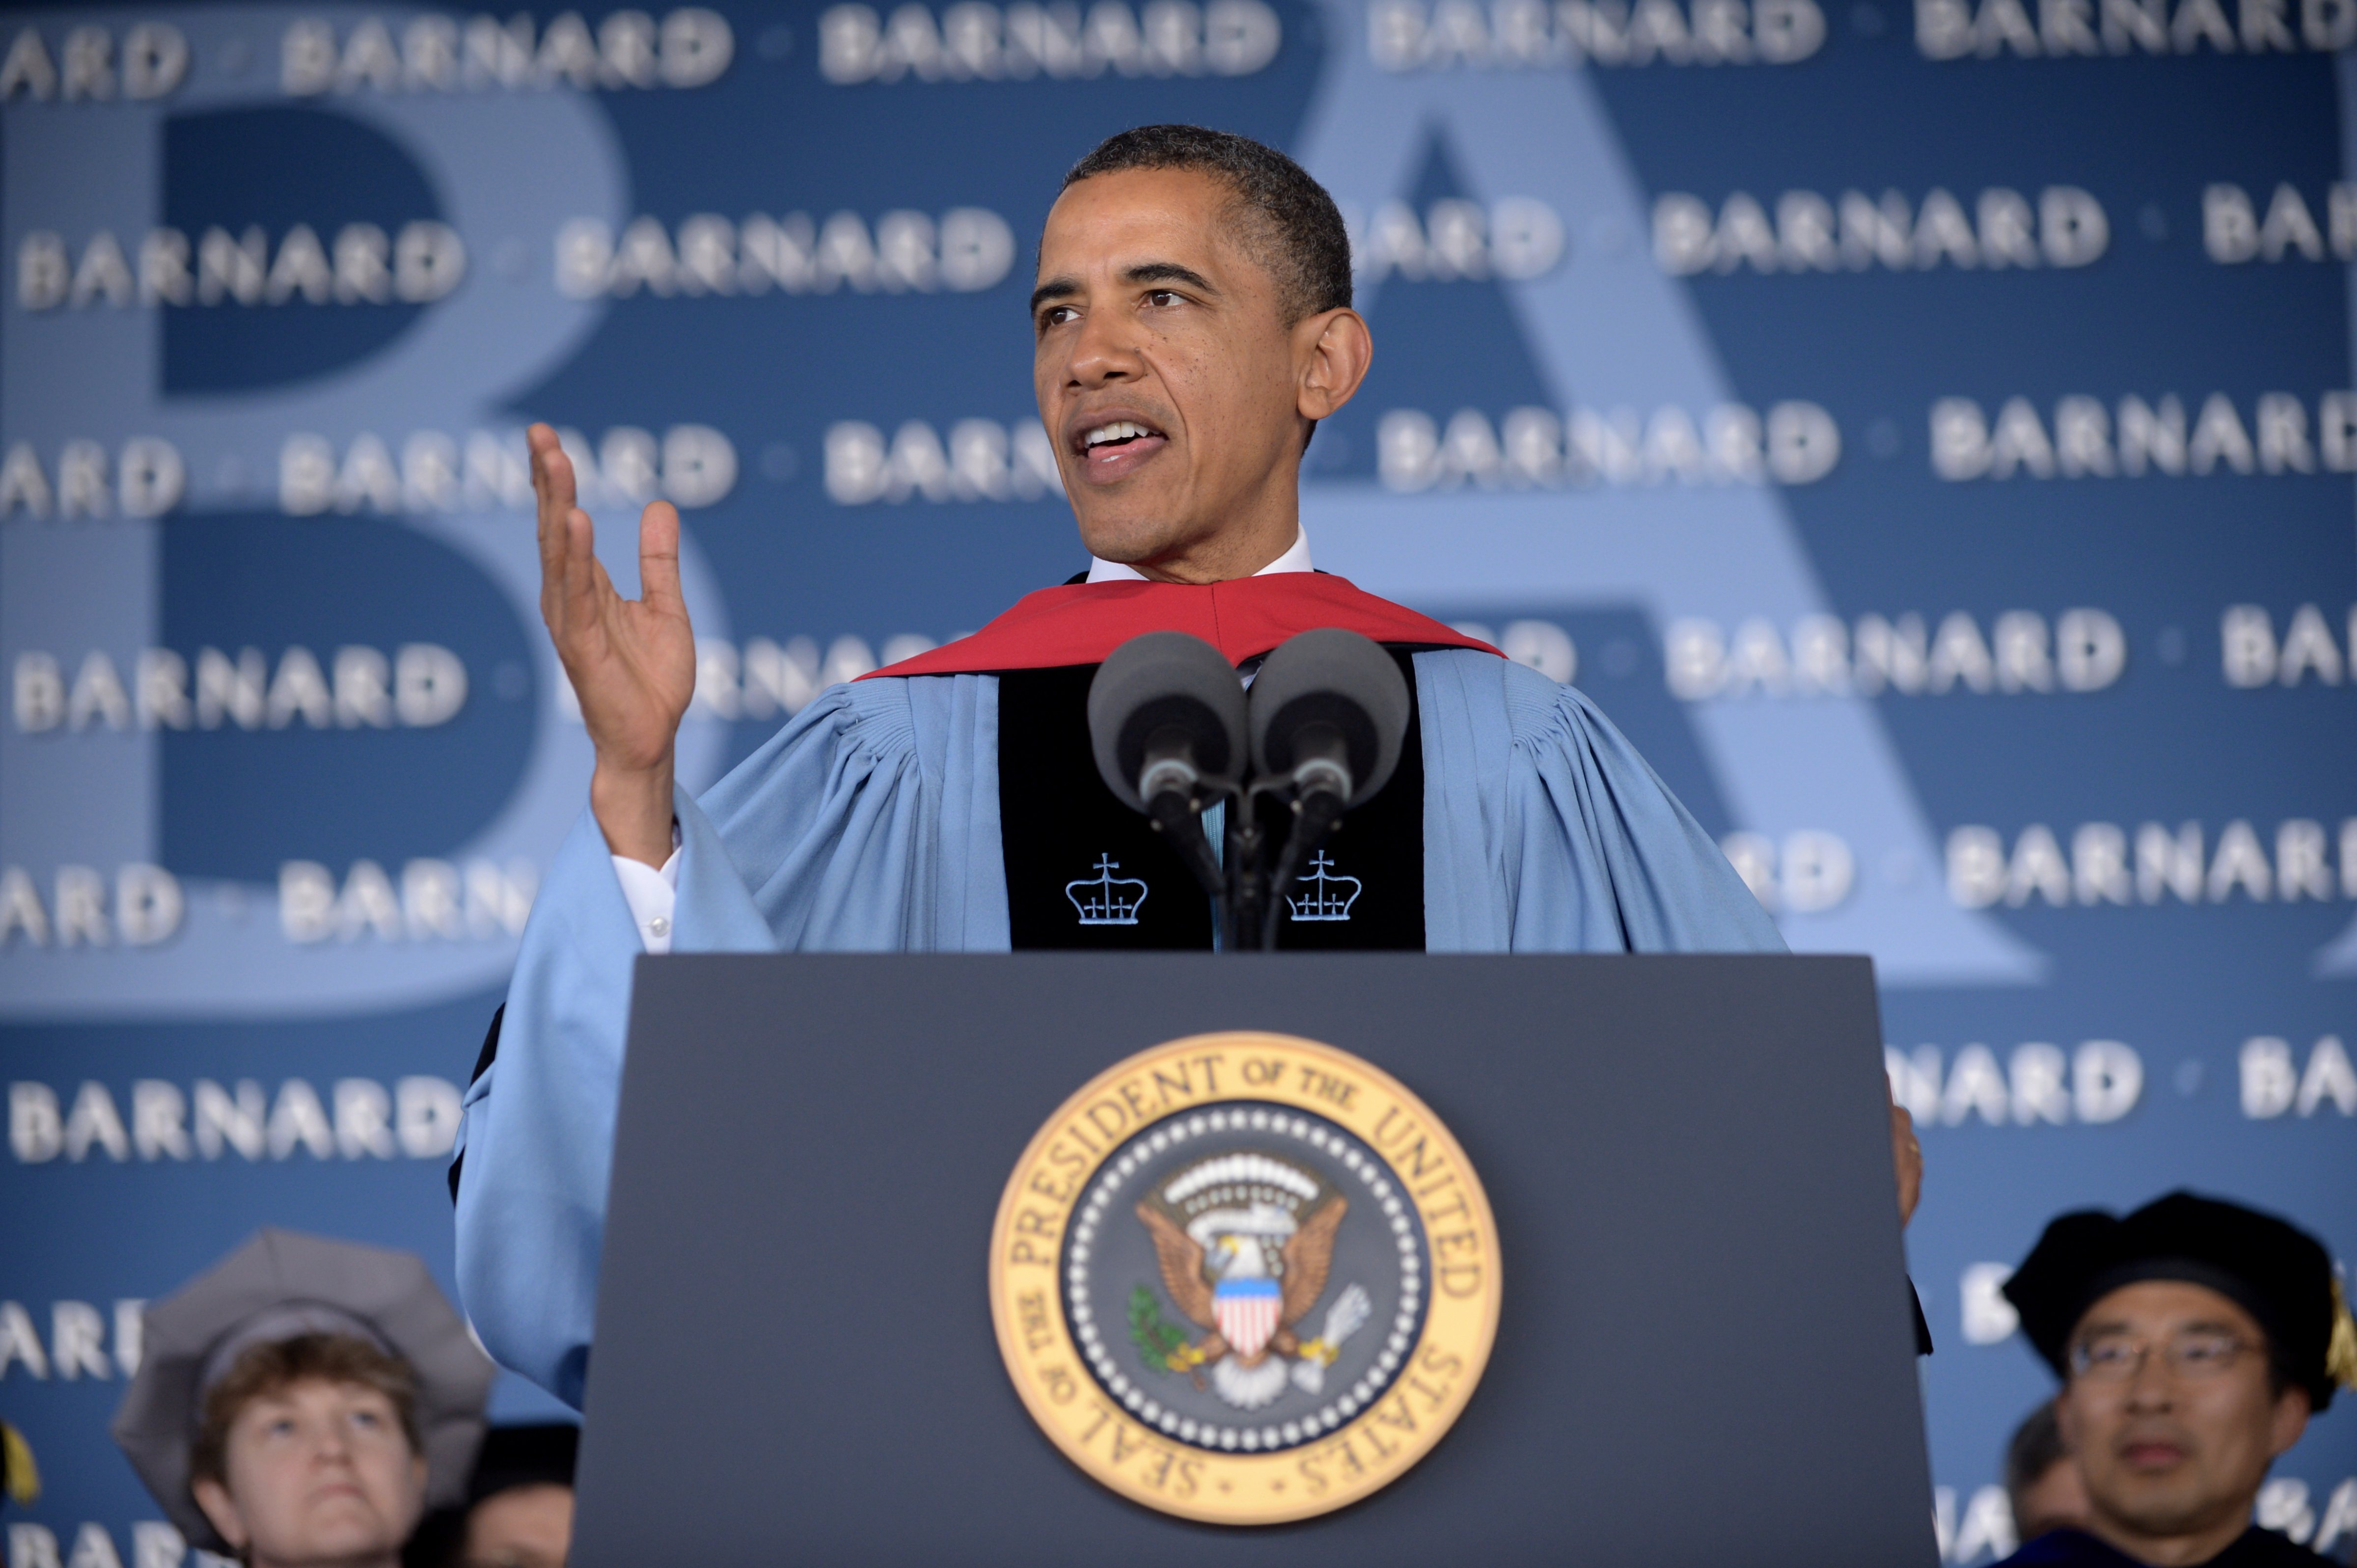 President Barack Obama delivers the commencement address at Barnard College on May 14, 2012 in New York. (Mandel Ngan—AFP/Getty Images)